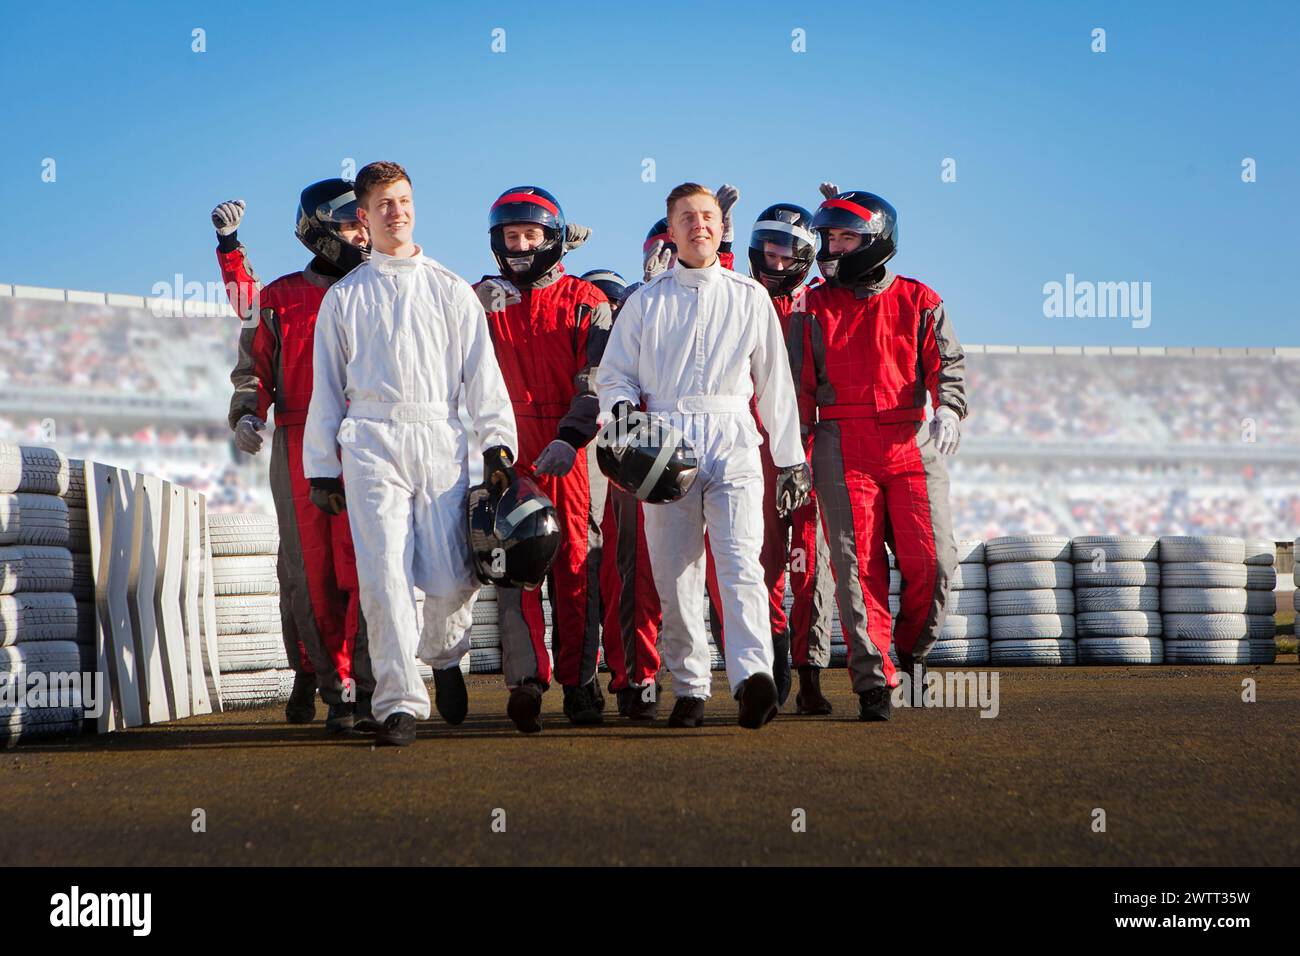 A group of people in racing suits walking on a racetrack, holding helmets and celebrating. Stock Photo